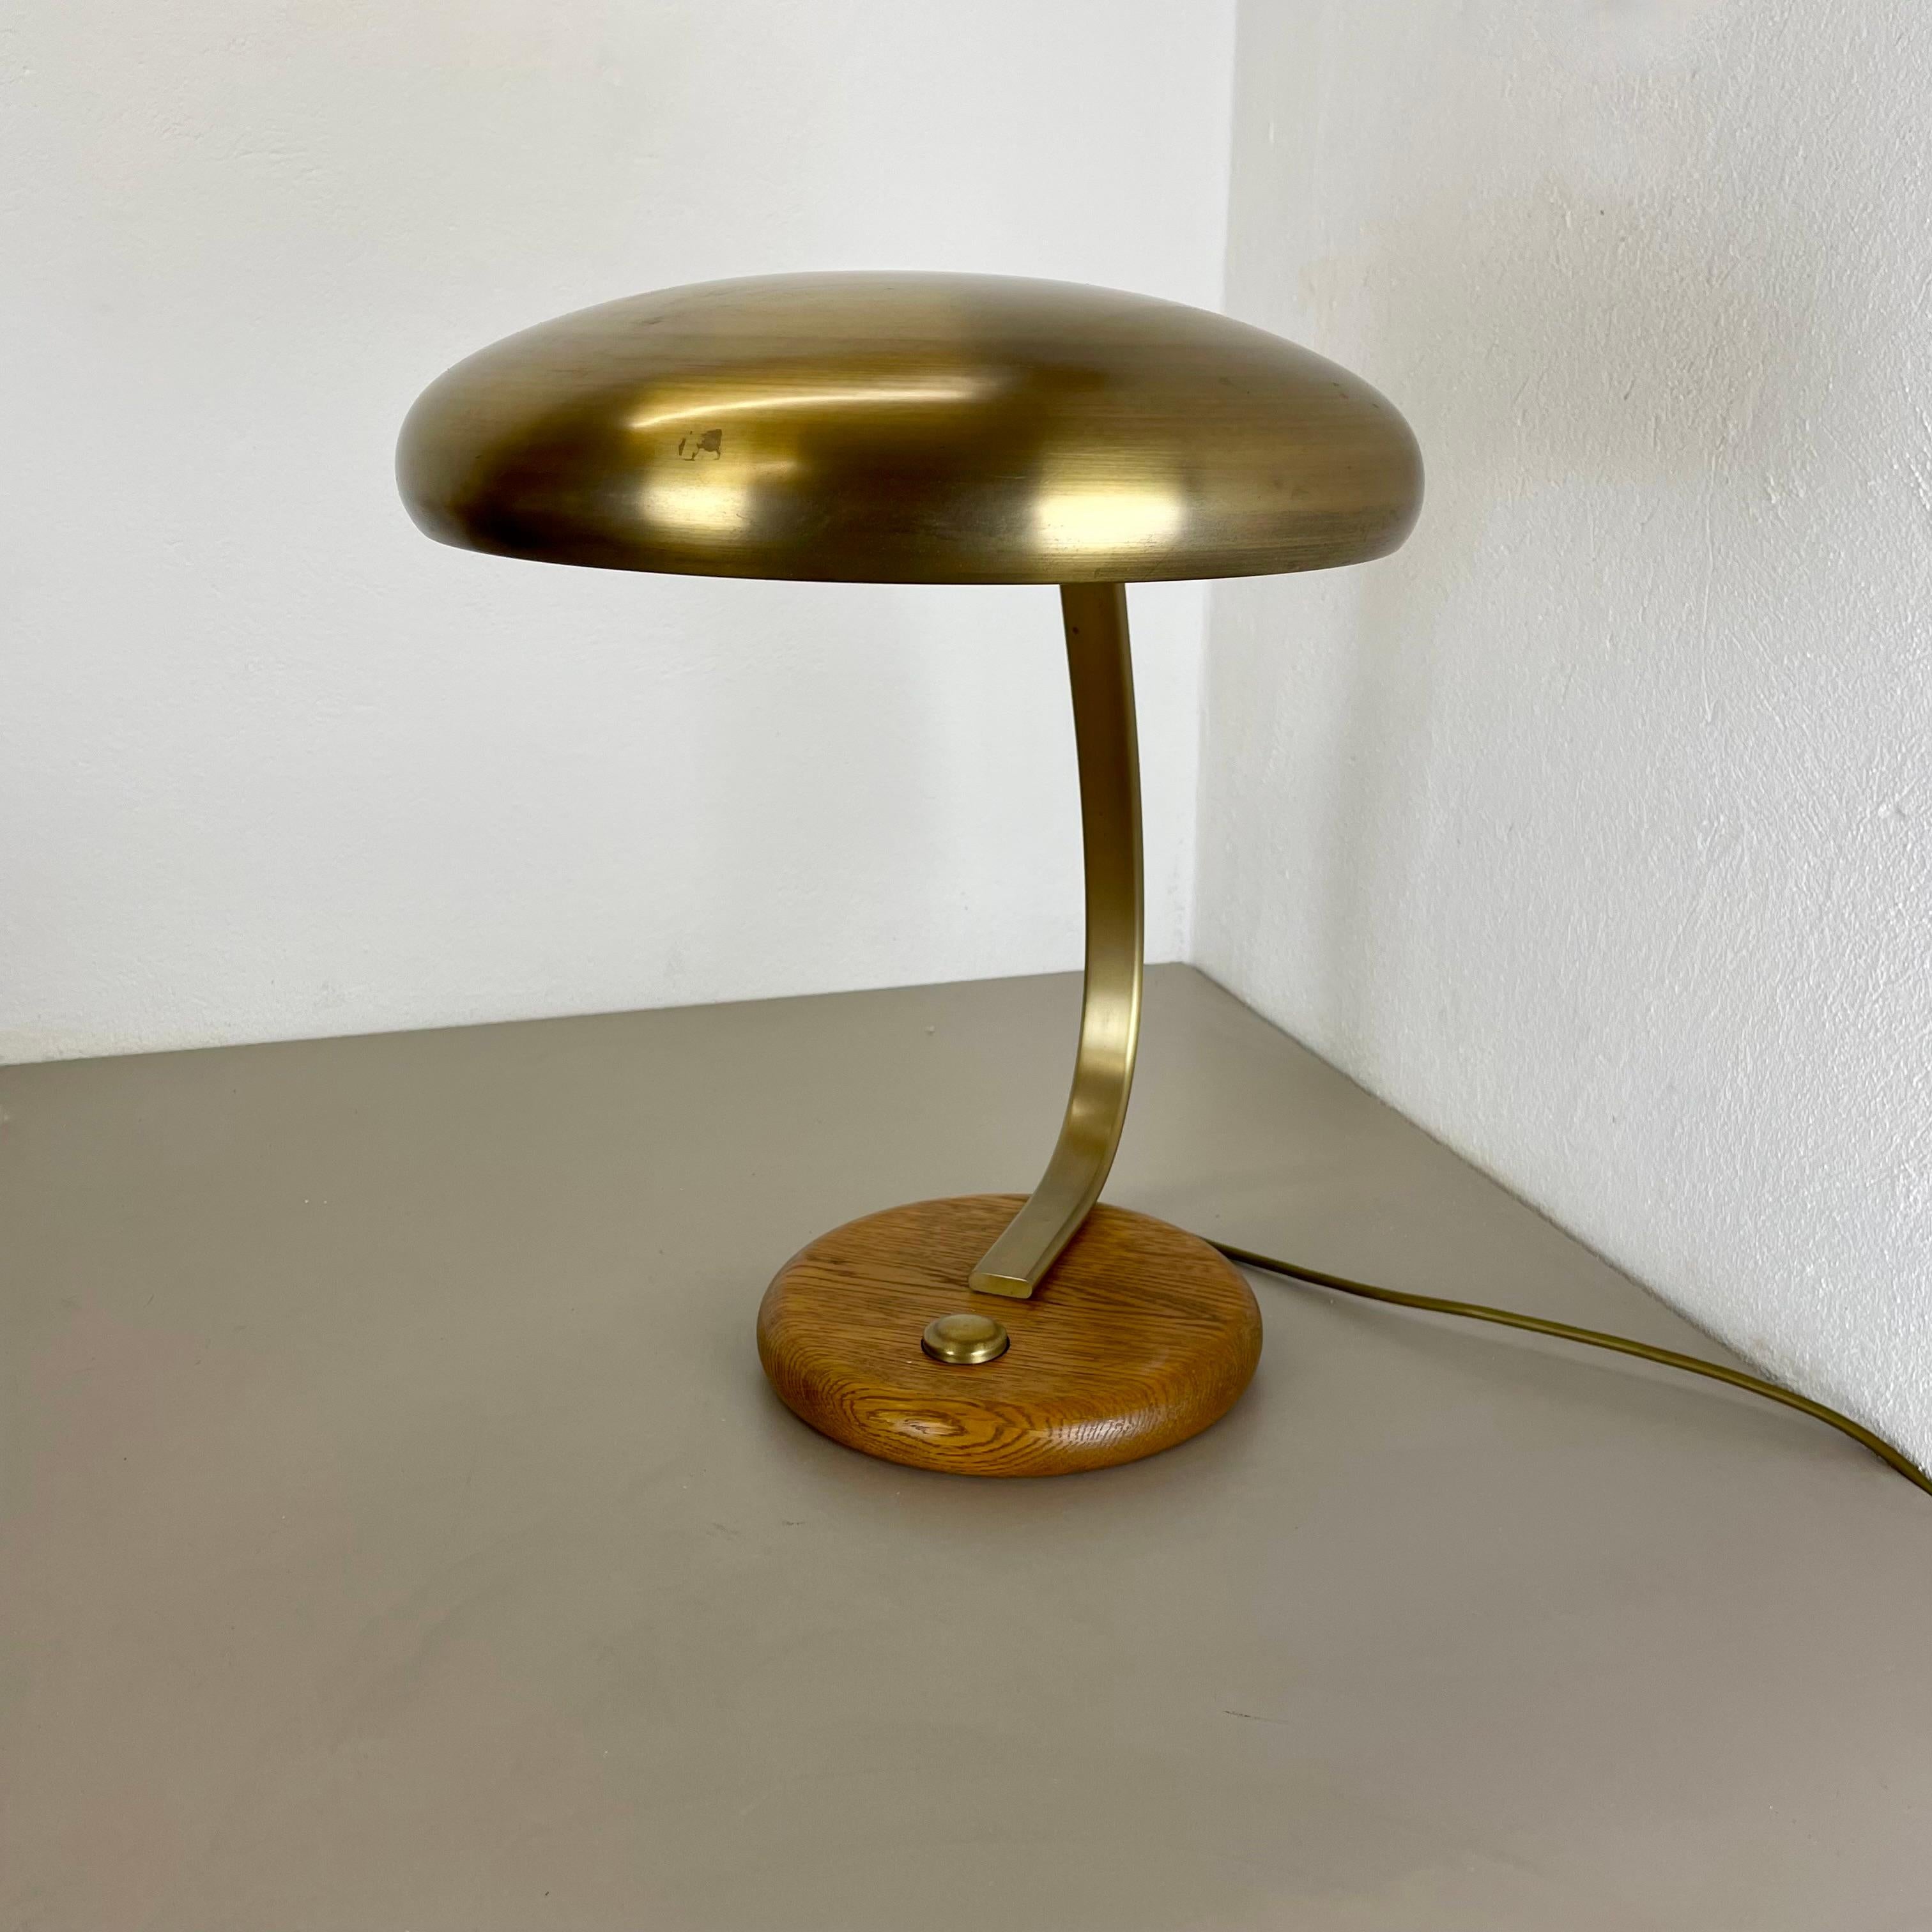 Large 44cm brass and oak wood Table Light Made Temde Lights, Germany, 1970s For Sale 4